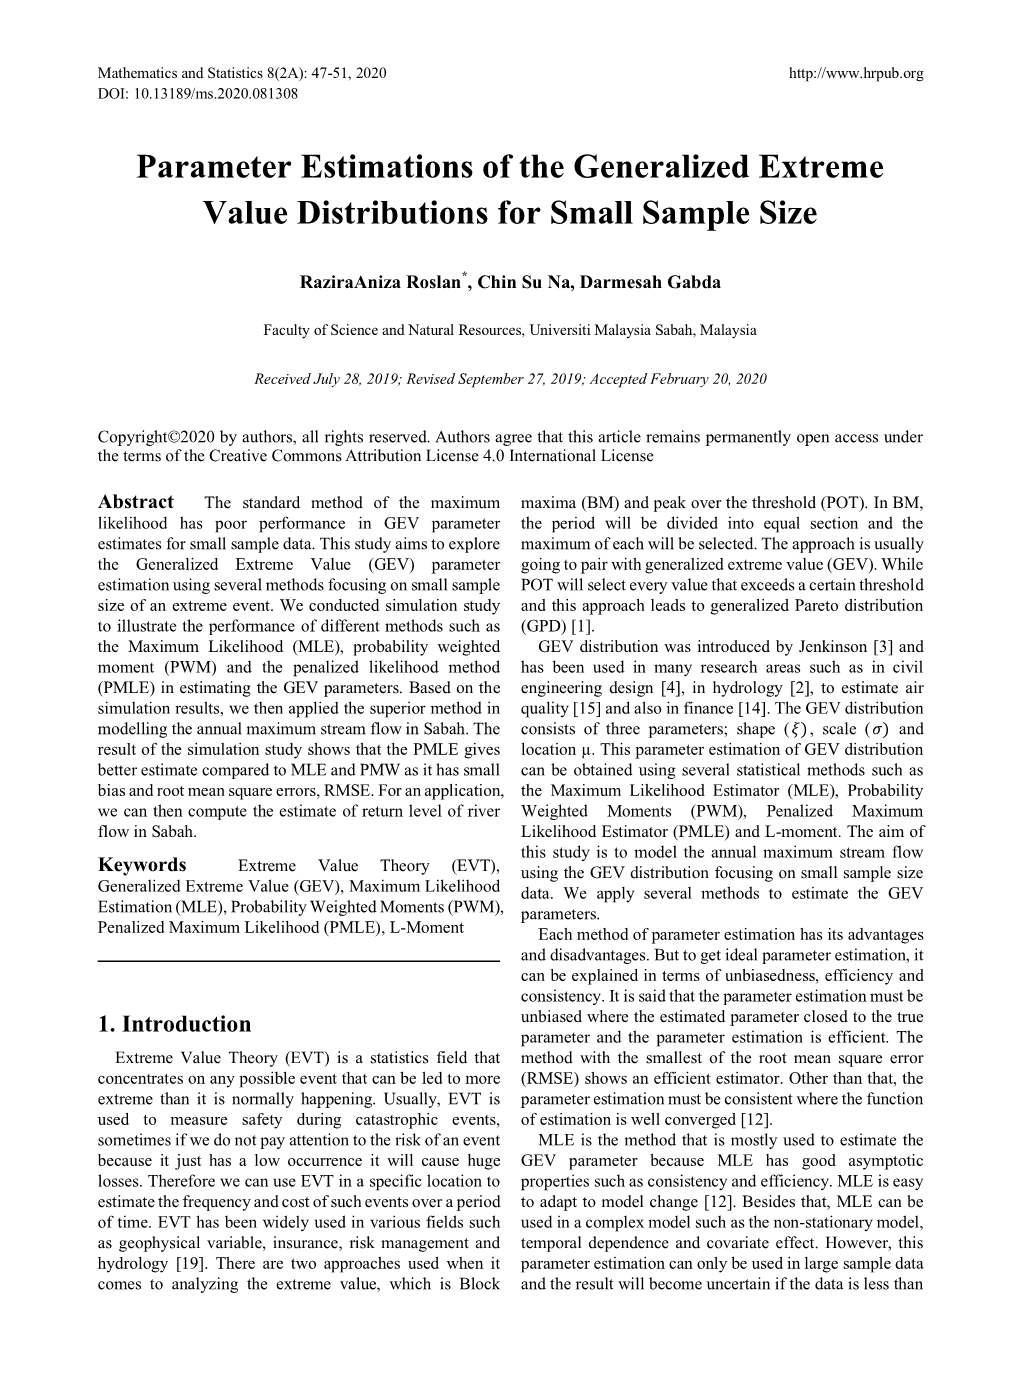 Parameter Estimations of the Generalized Extreme Value Distributions for Small Sample Size